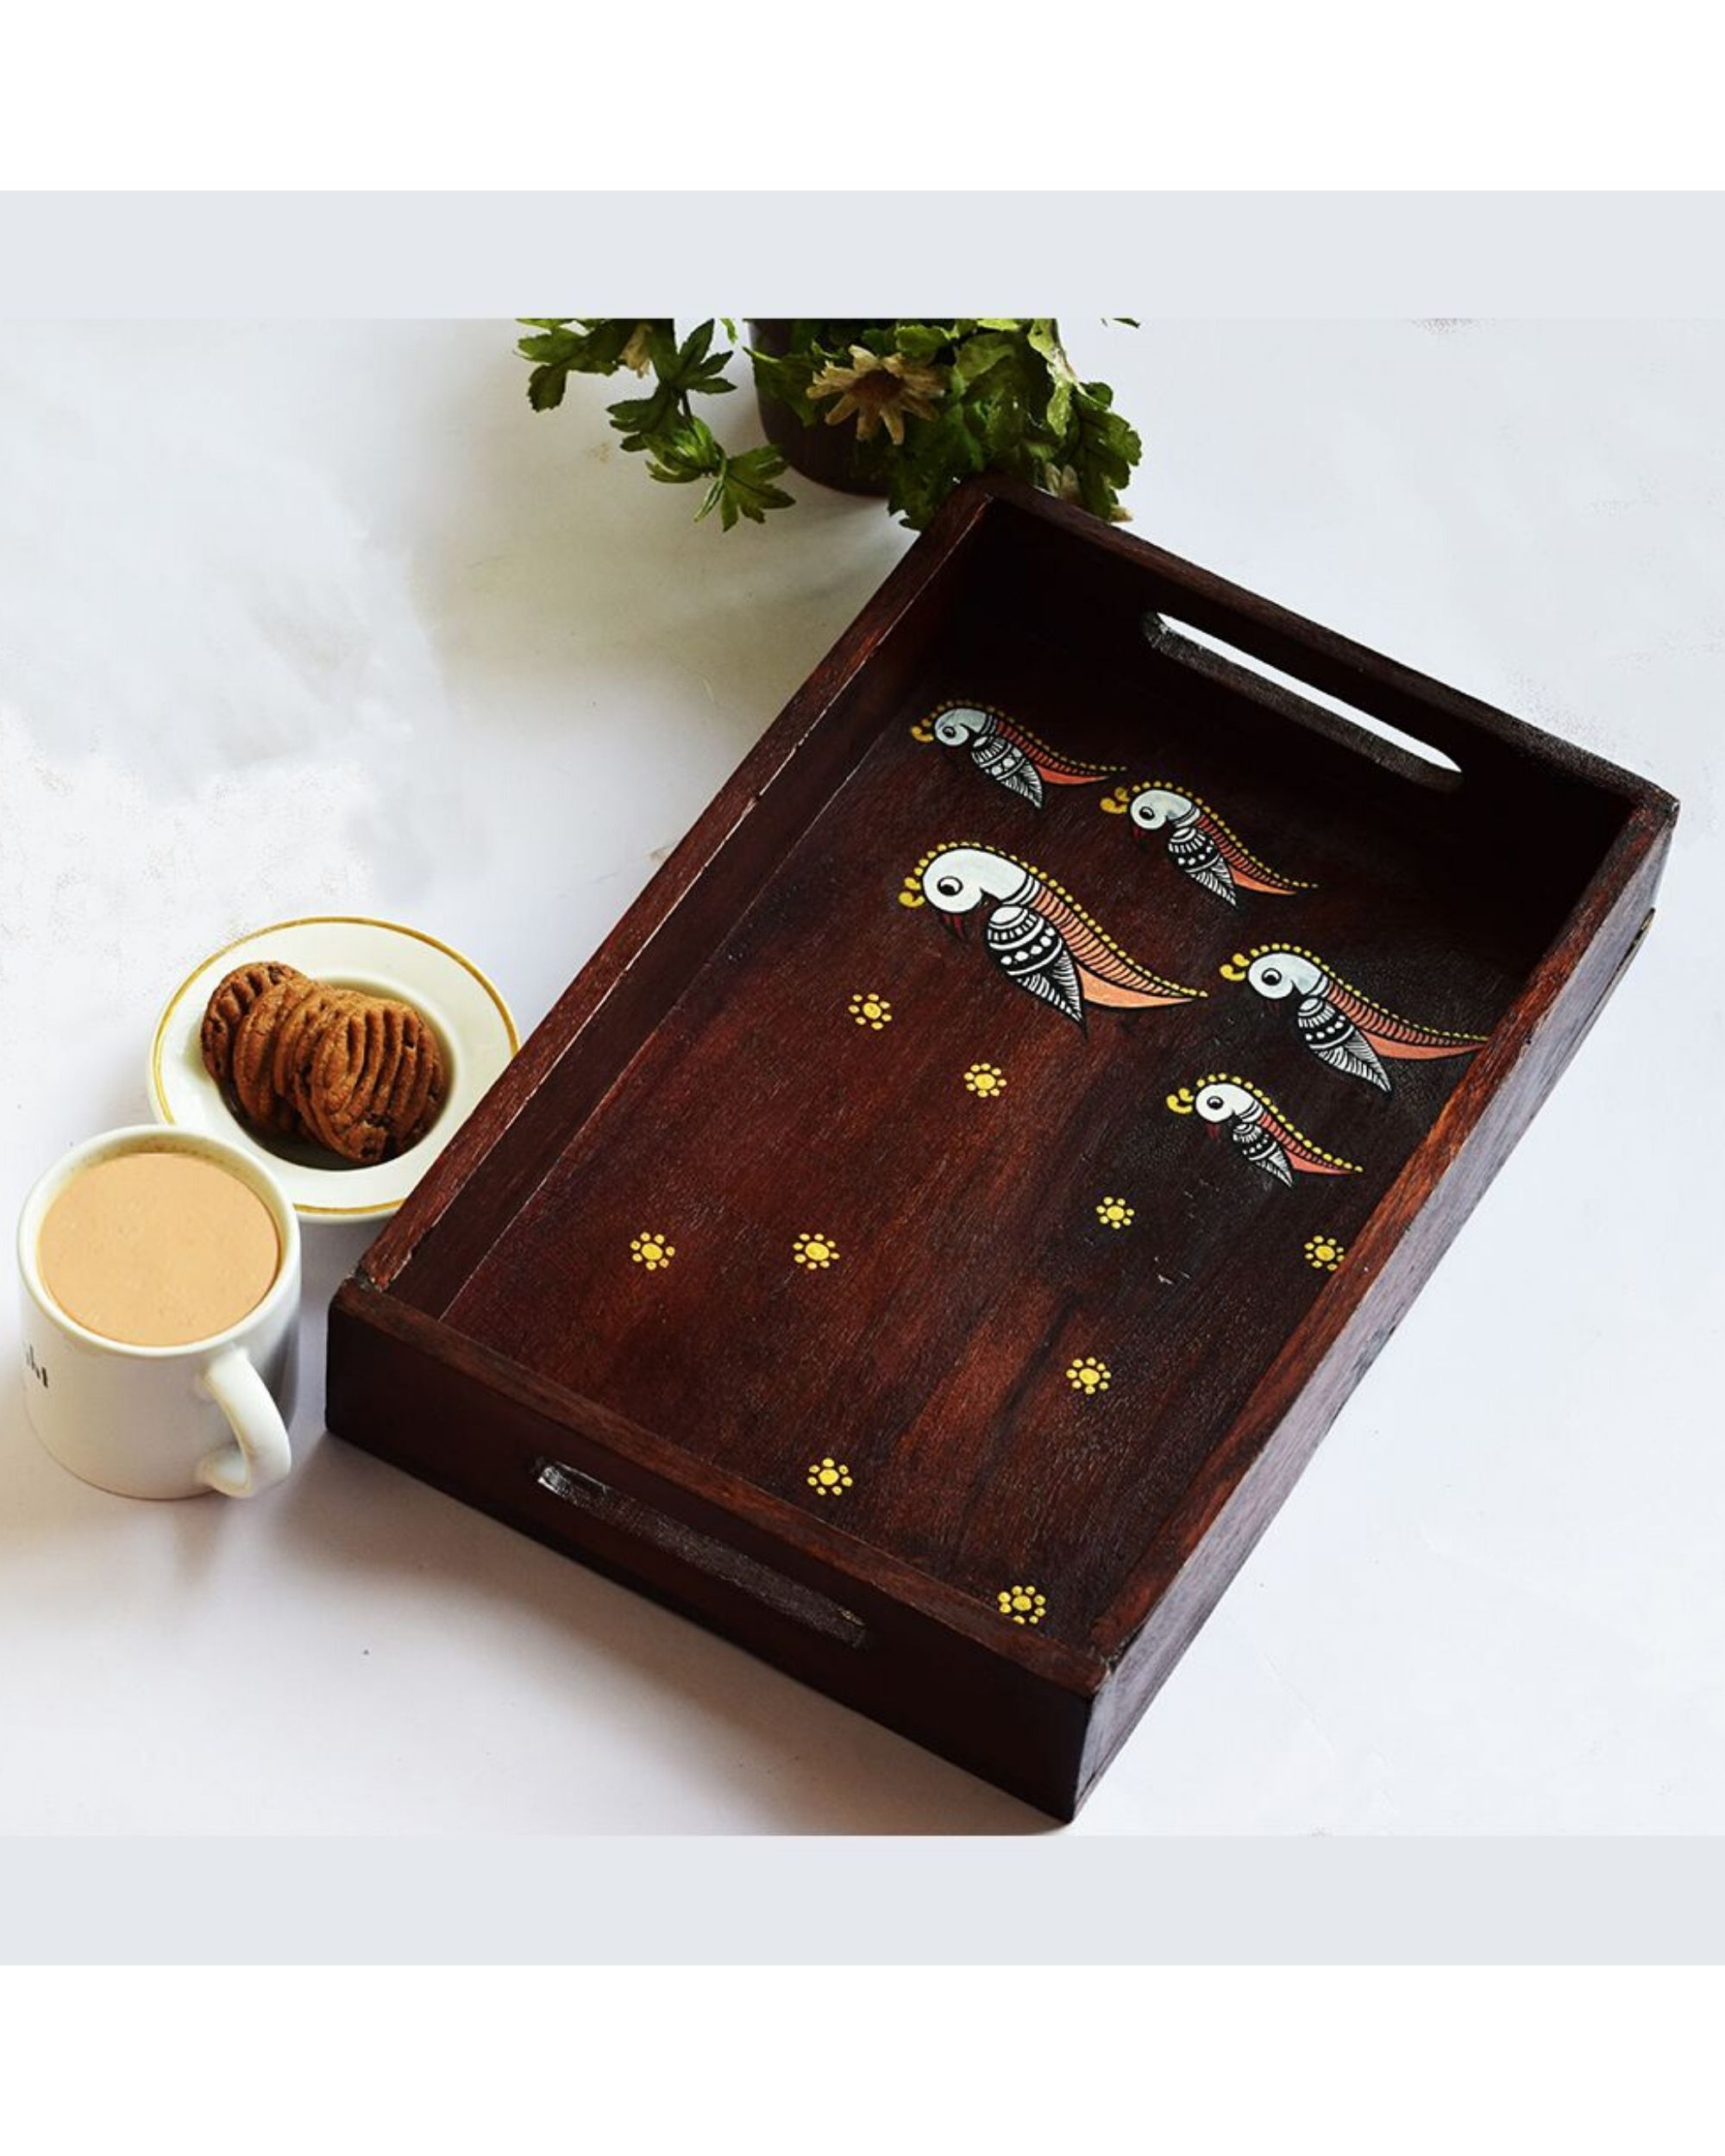 Hand painted parrot tray